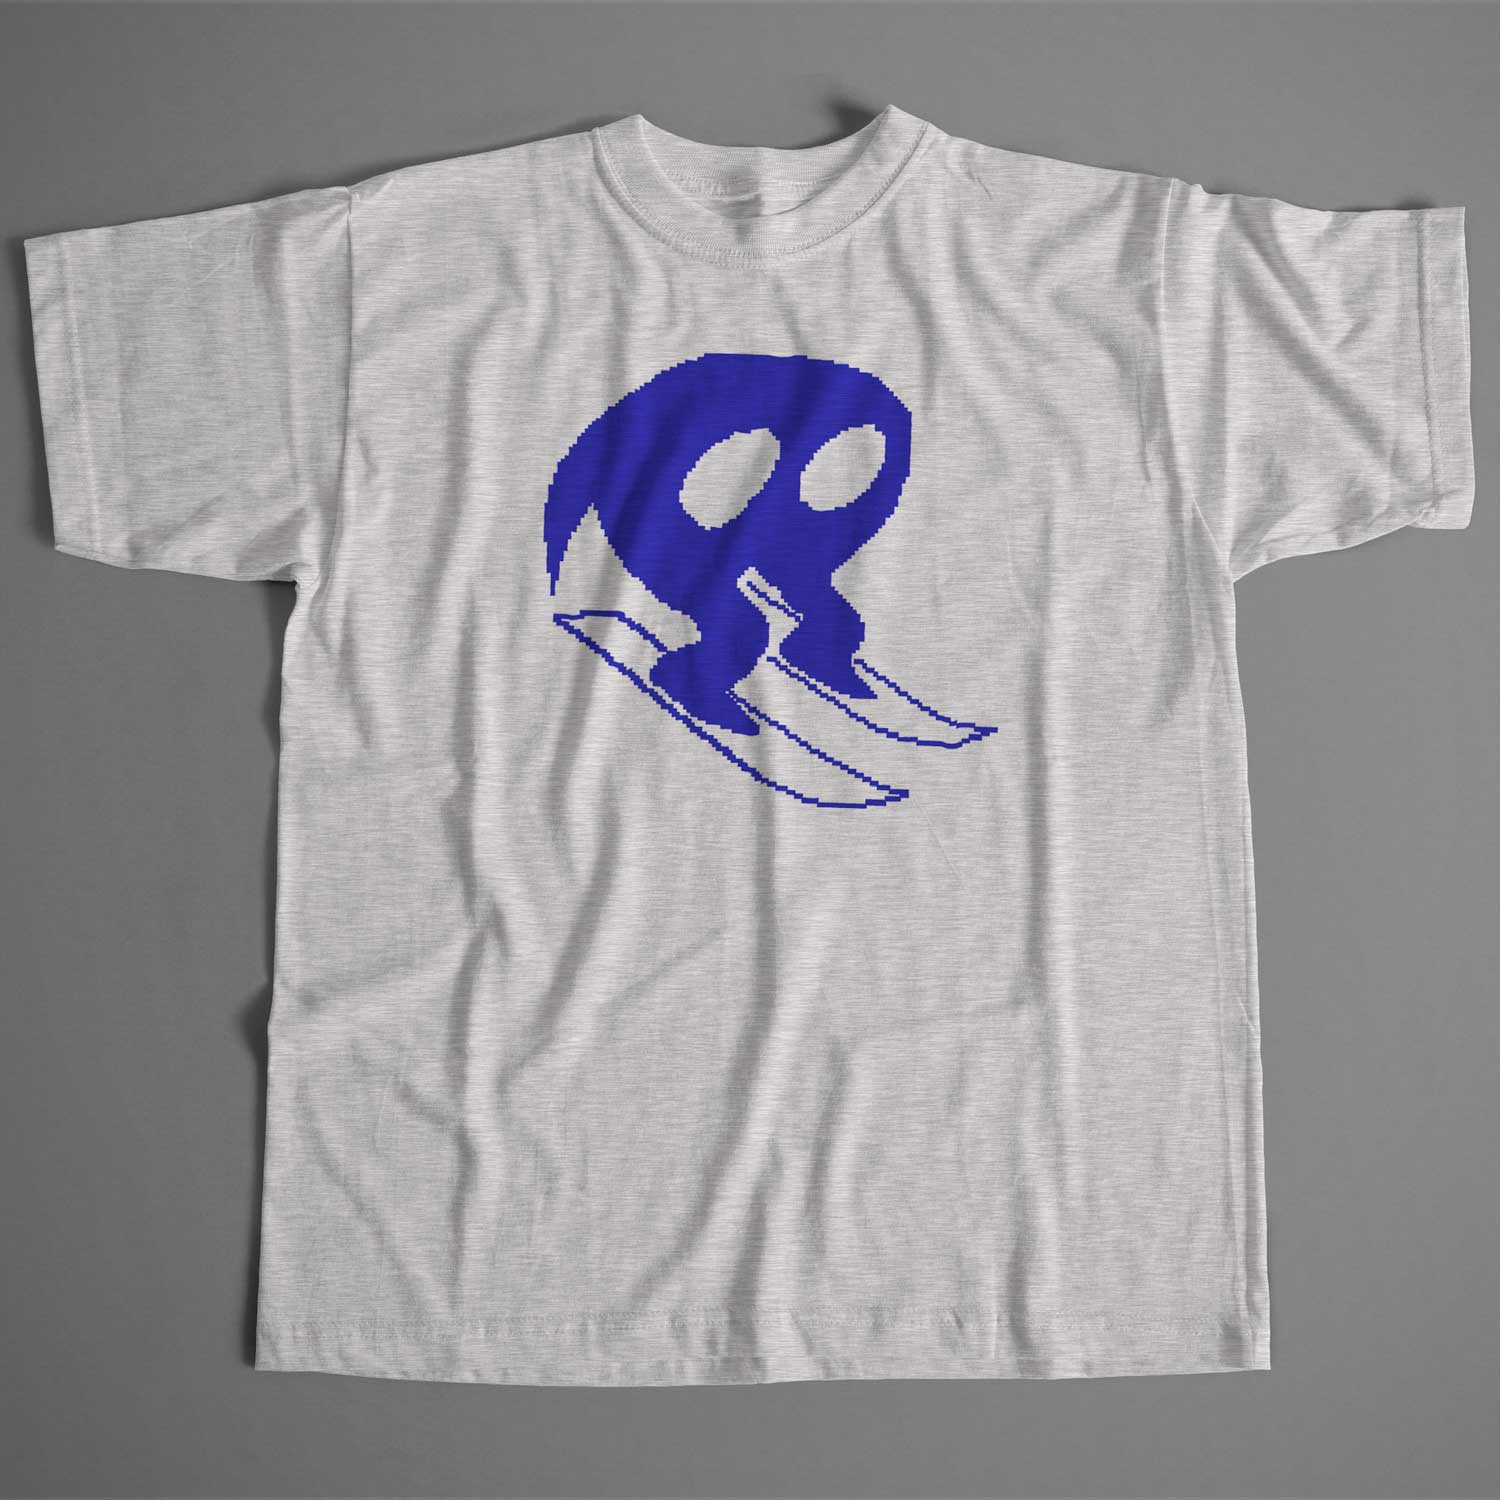 Horace Goes Skiing T shirt